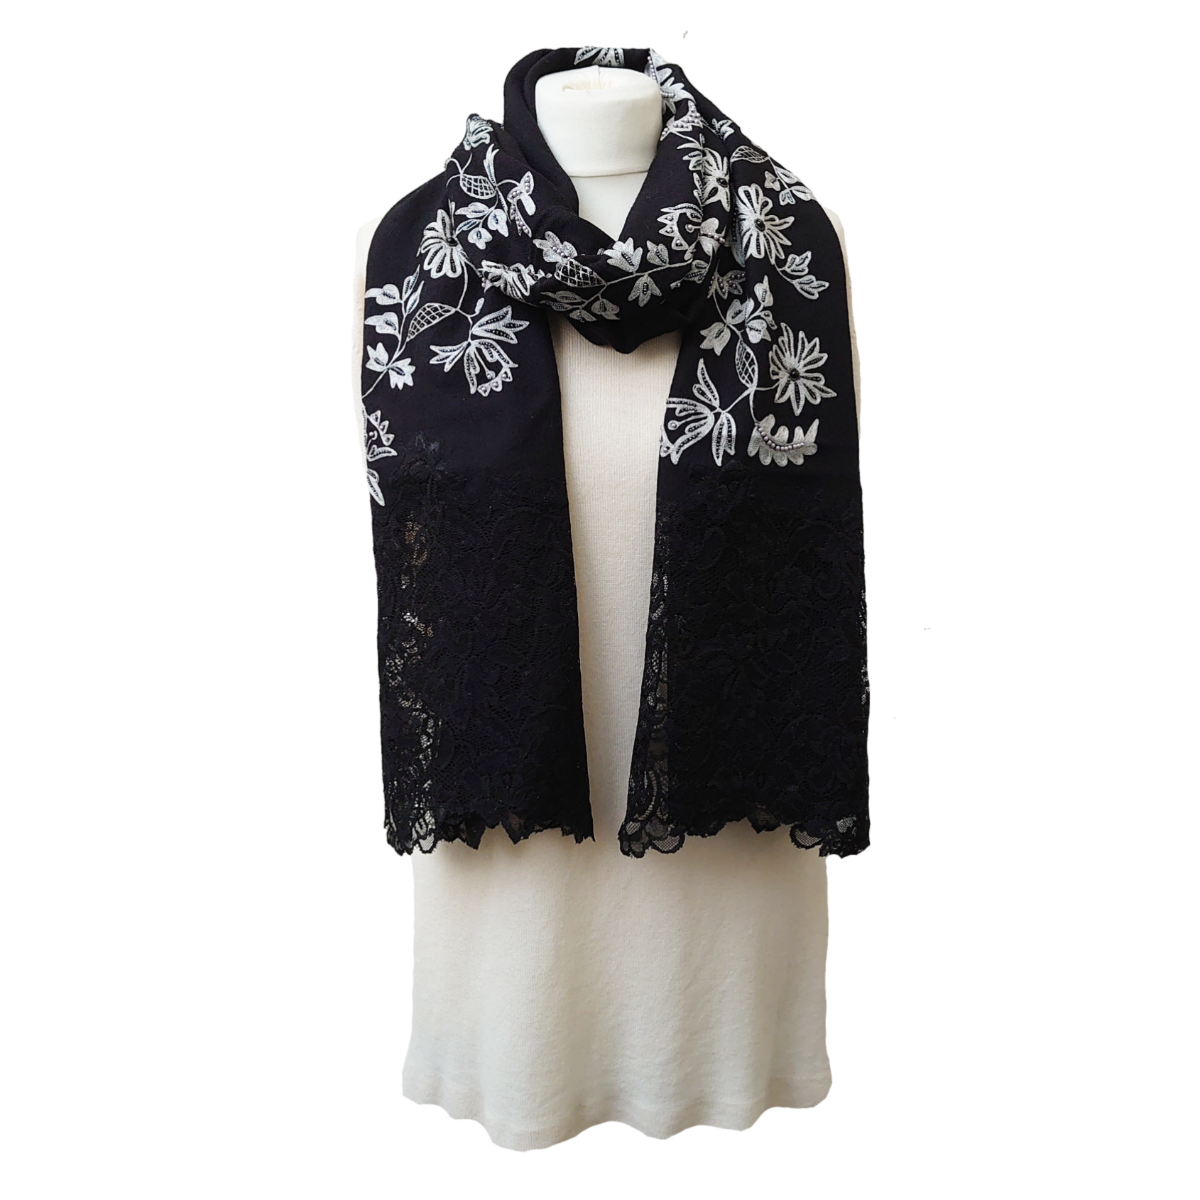 Exclusive, Ltd Edition Pashmina Stole With Embroidery, Beads and Lace - Black-White